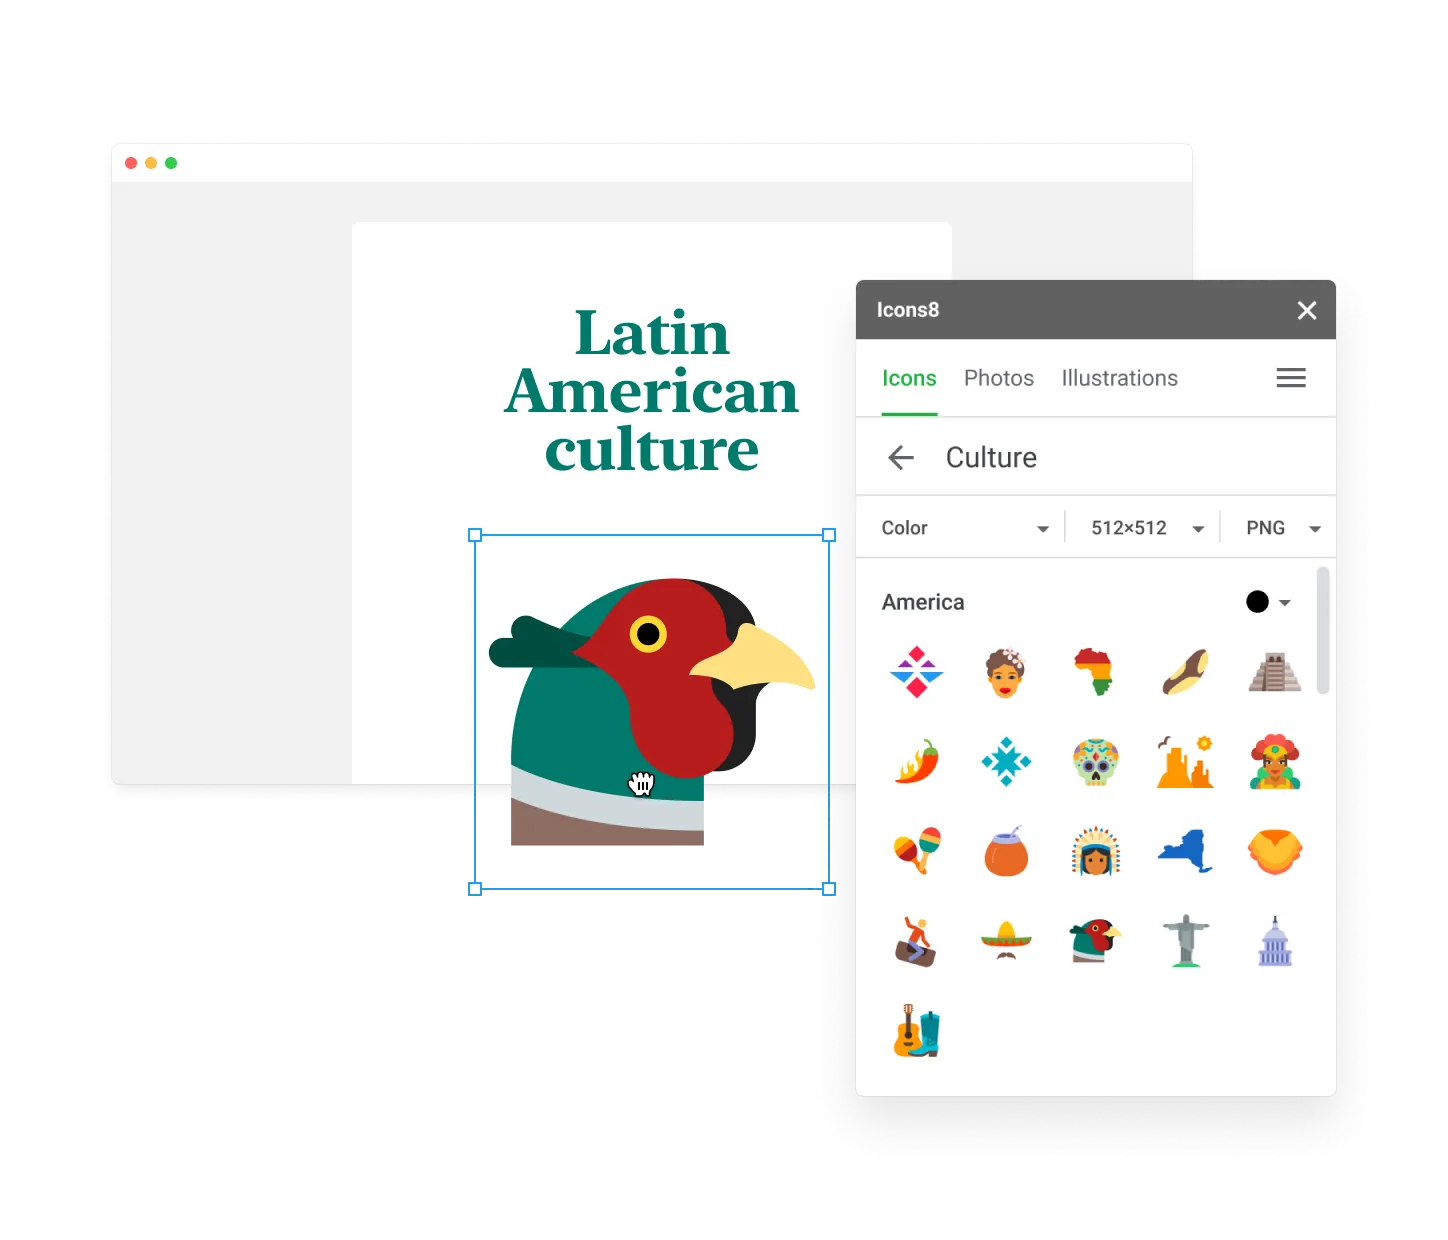 1M+ icons, illustrations, and photos for Google Docs